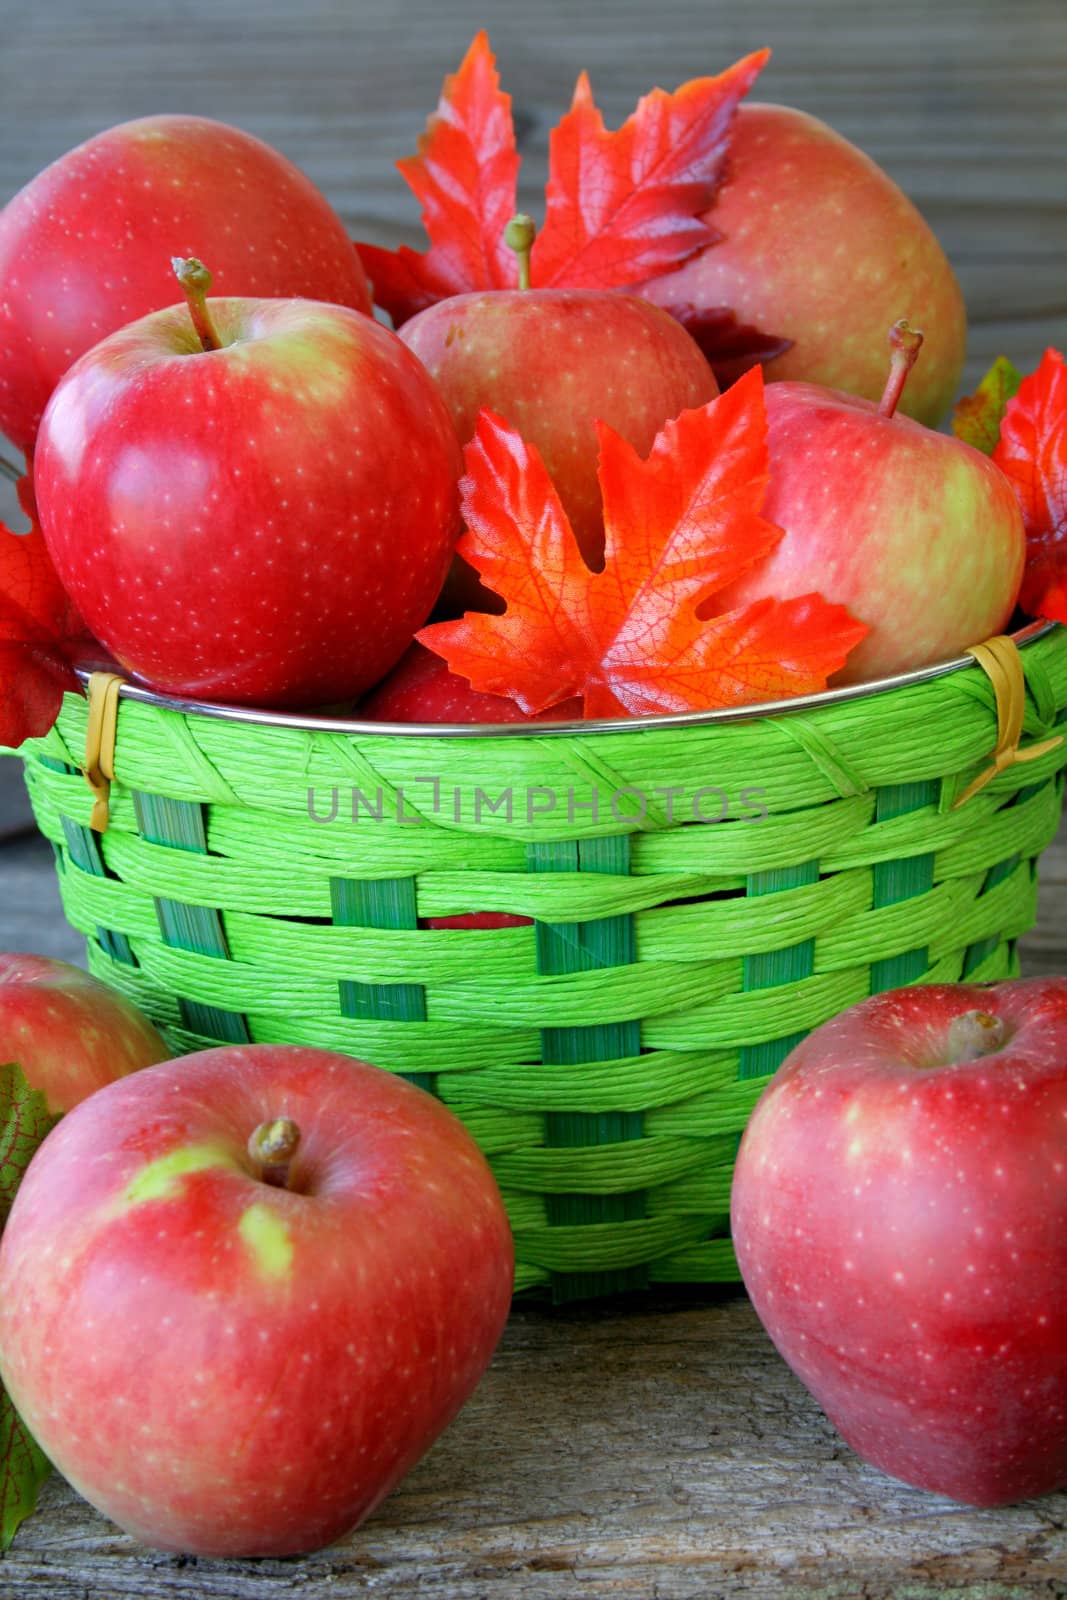 A close up of a basket full of apples with silk fall leaves.